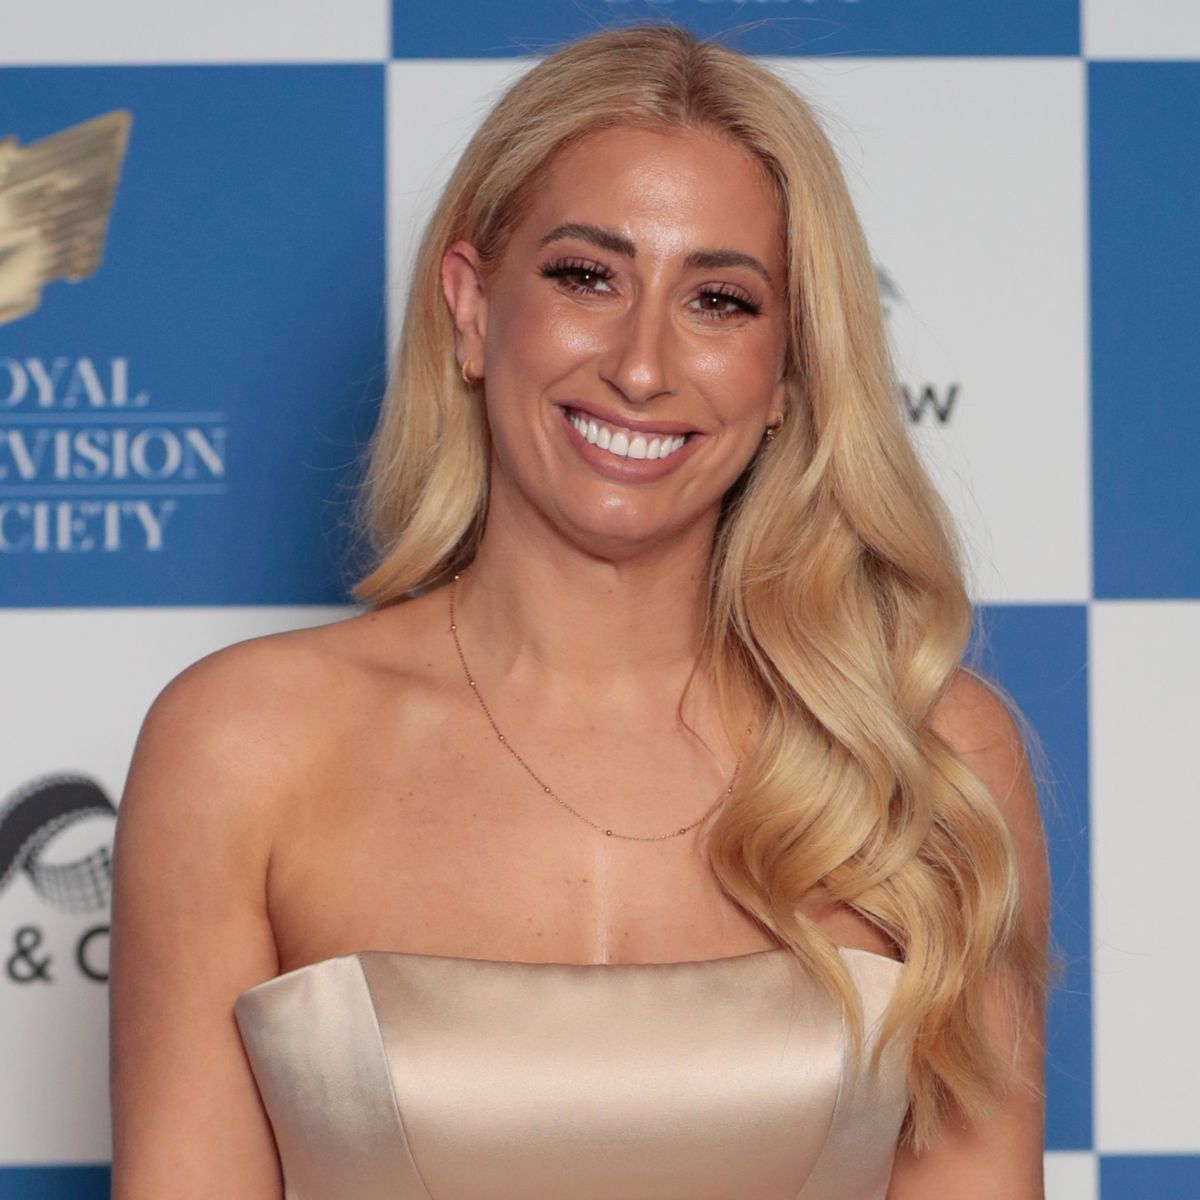 Stacey Solomon's dreamy gift wrapping station is the perfect solution for storing awkward-shaped gift supplies